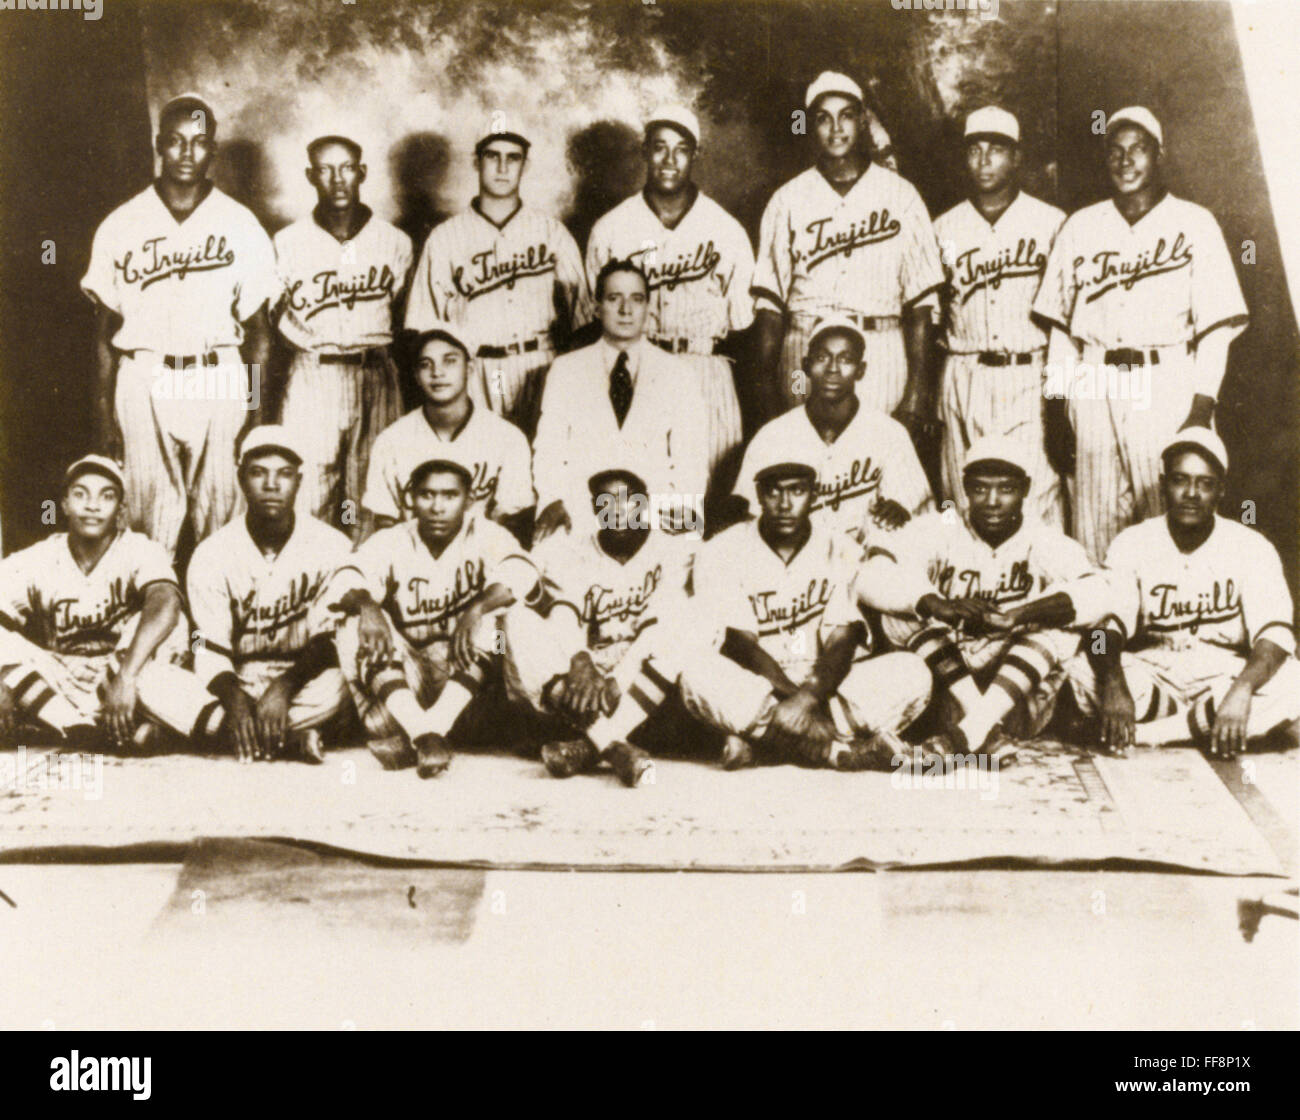 BASEBALL: NEGRO LEAGUES. /n'Cool Papa' Bell (front row, center), 'Satchel'  Paige (middle, far right), Josh Gibson (back, far left) and other members  of an American Negro Leagues All-Star team which participated in